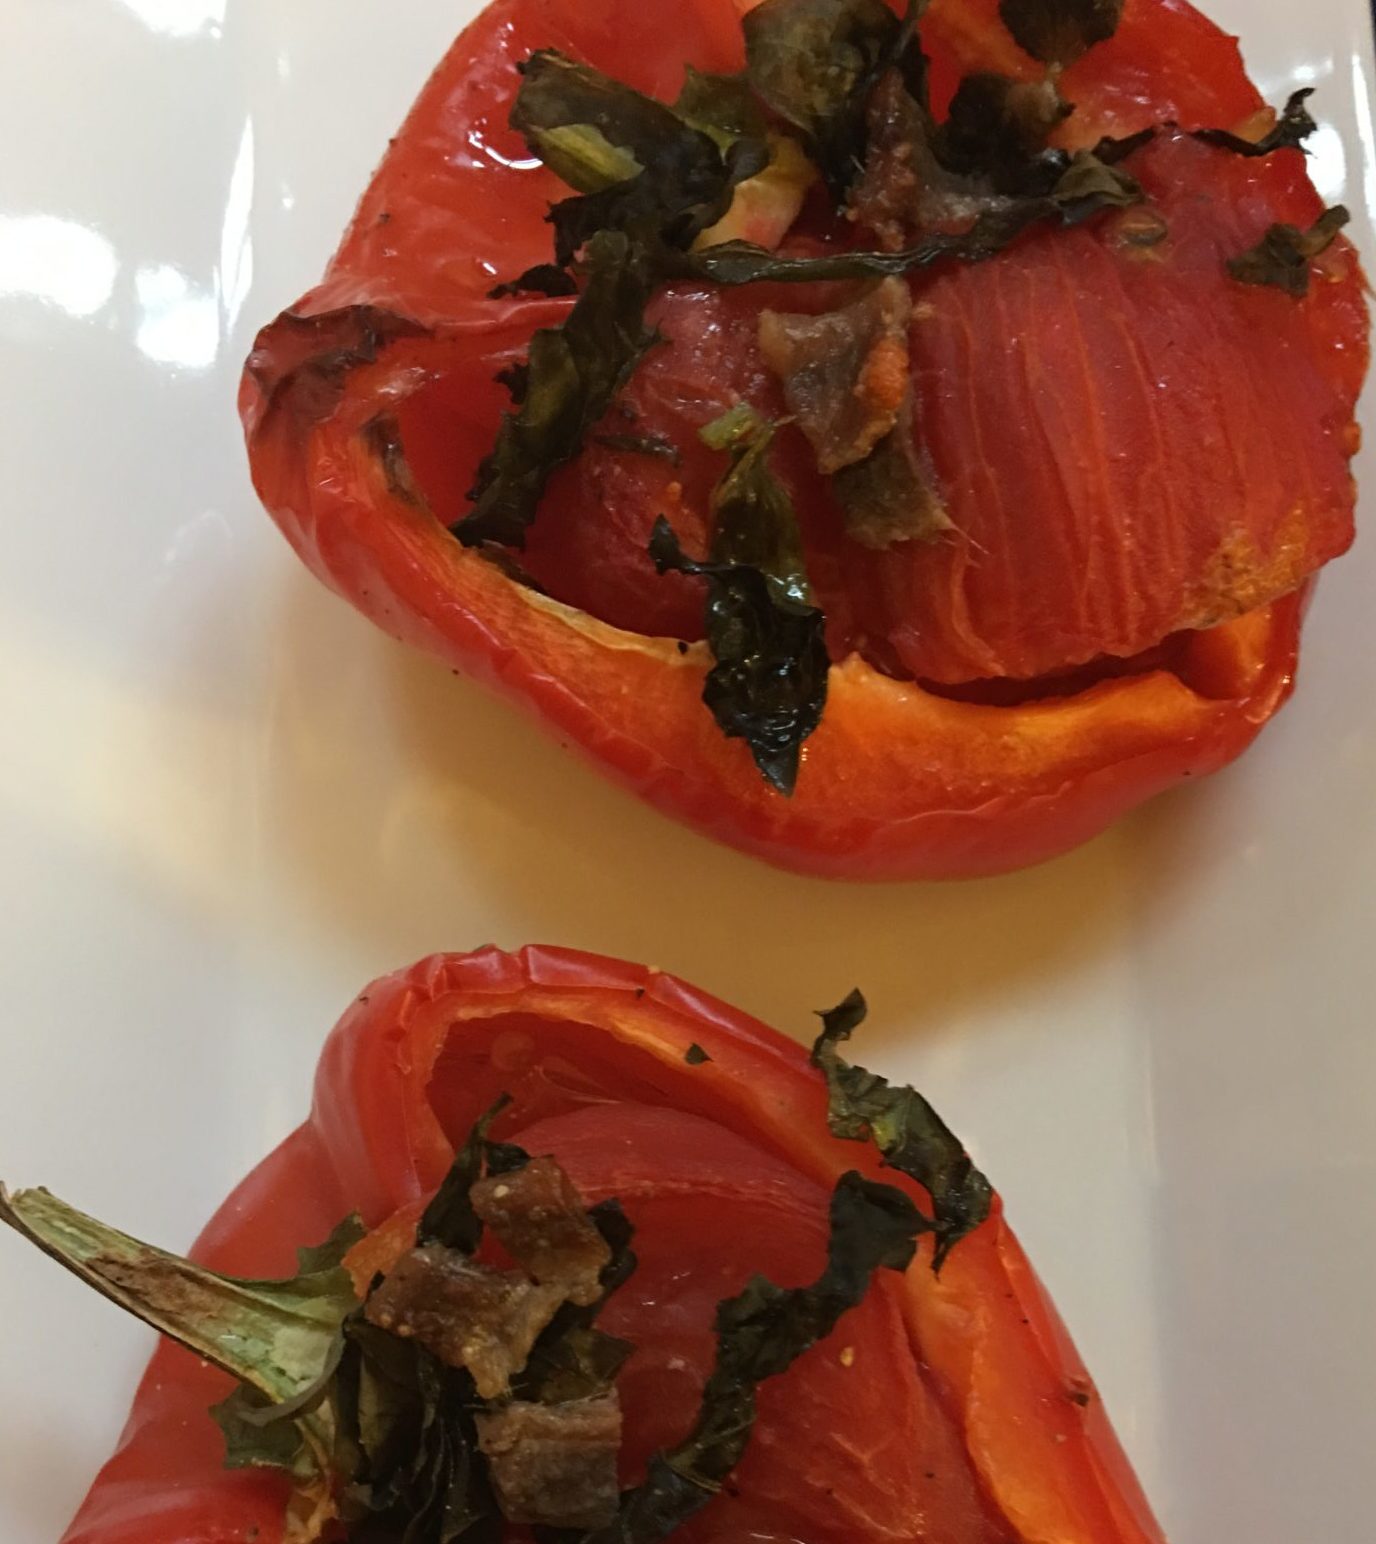 Tomatoes in roasted red peppers with basil and anchovies